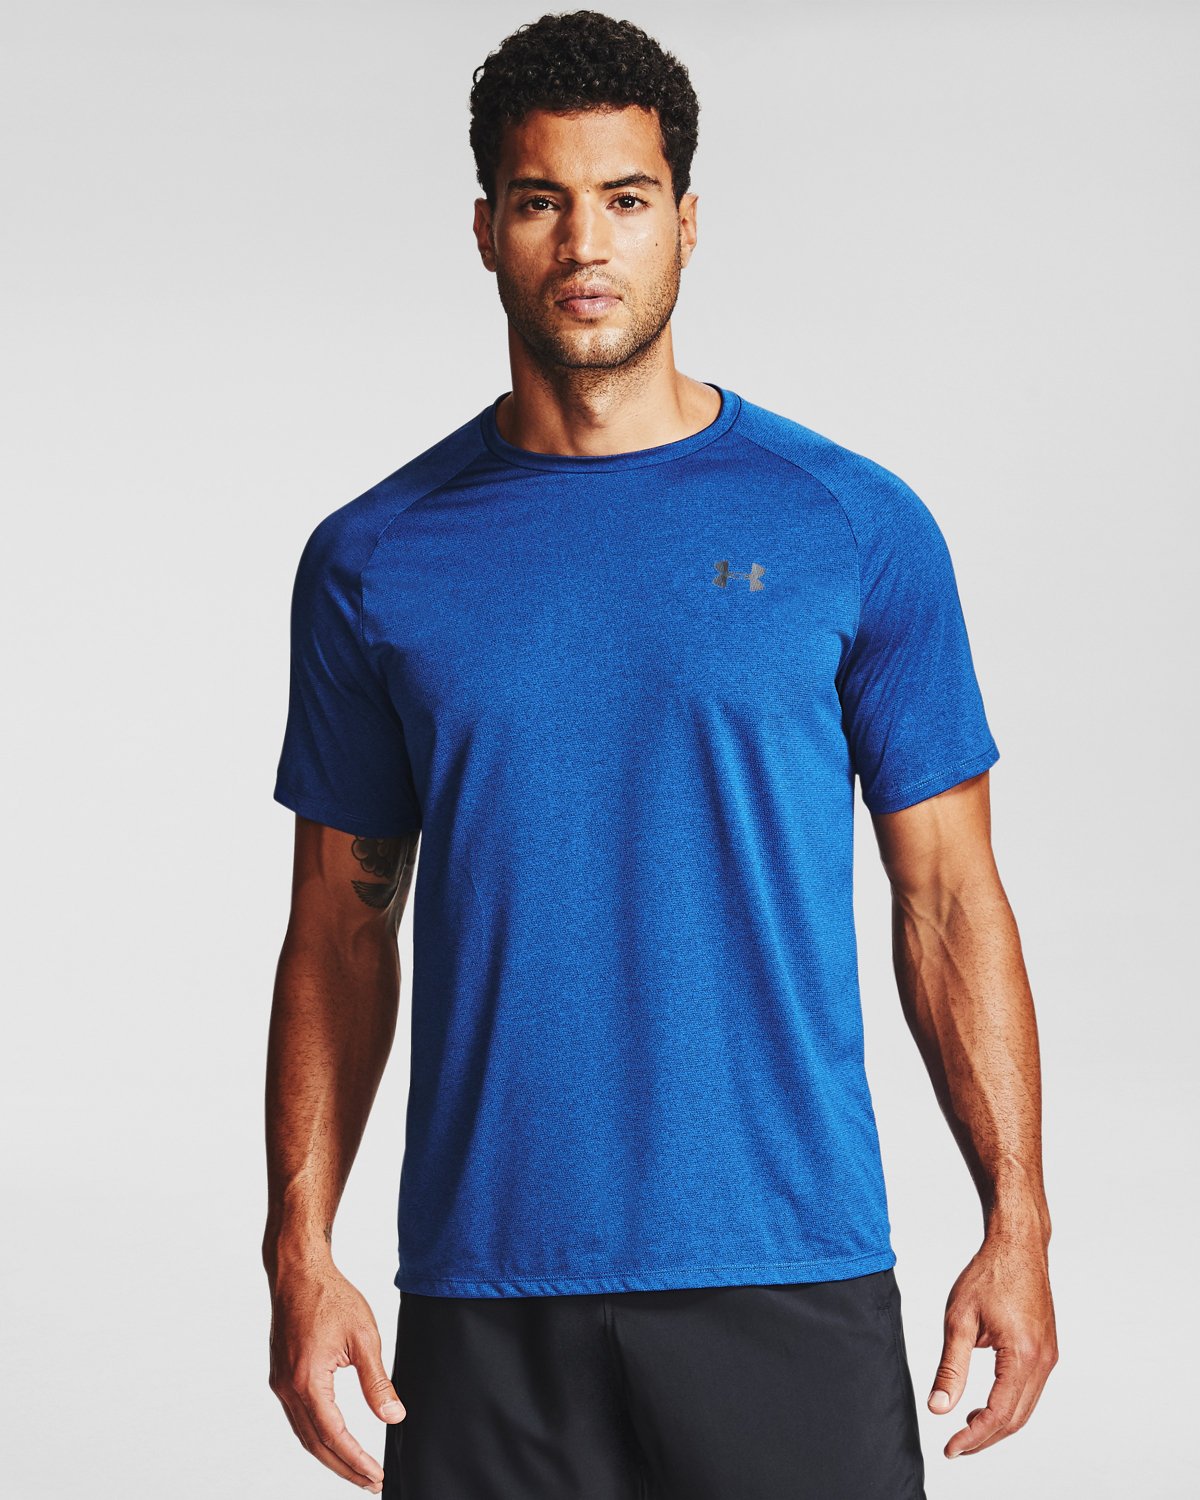  Under Armour Men's Armour Fleece 1/2 Zip T-Shirt, Academy Blue  (408)/Black, X-Small : Clothing, Shoes & Jewelry